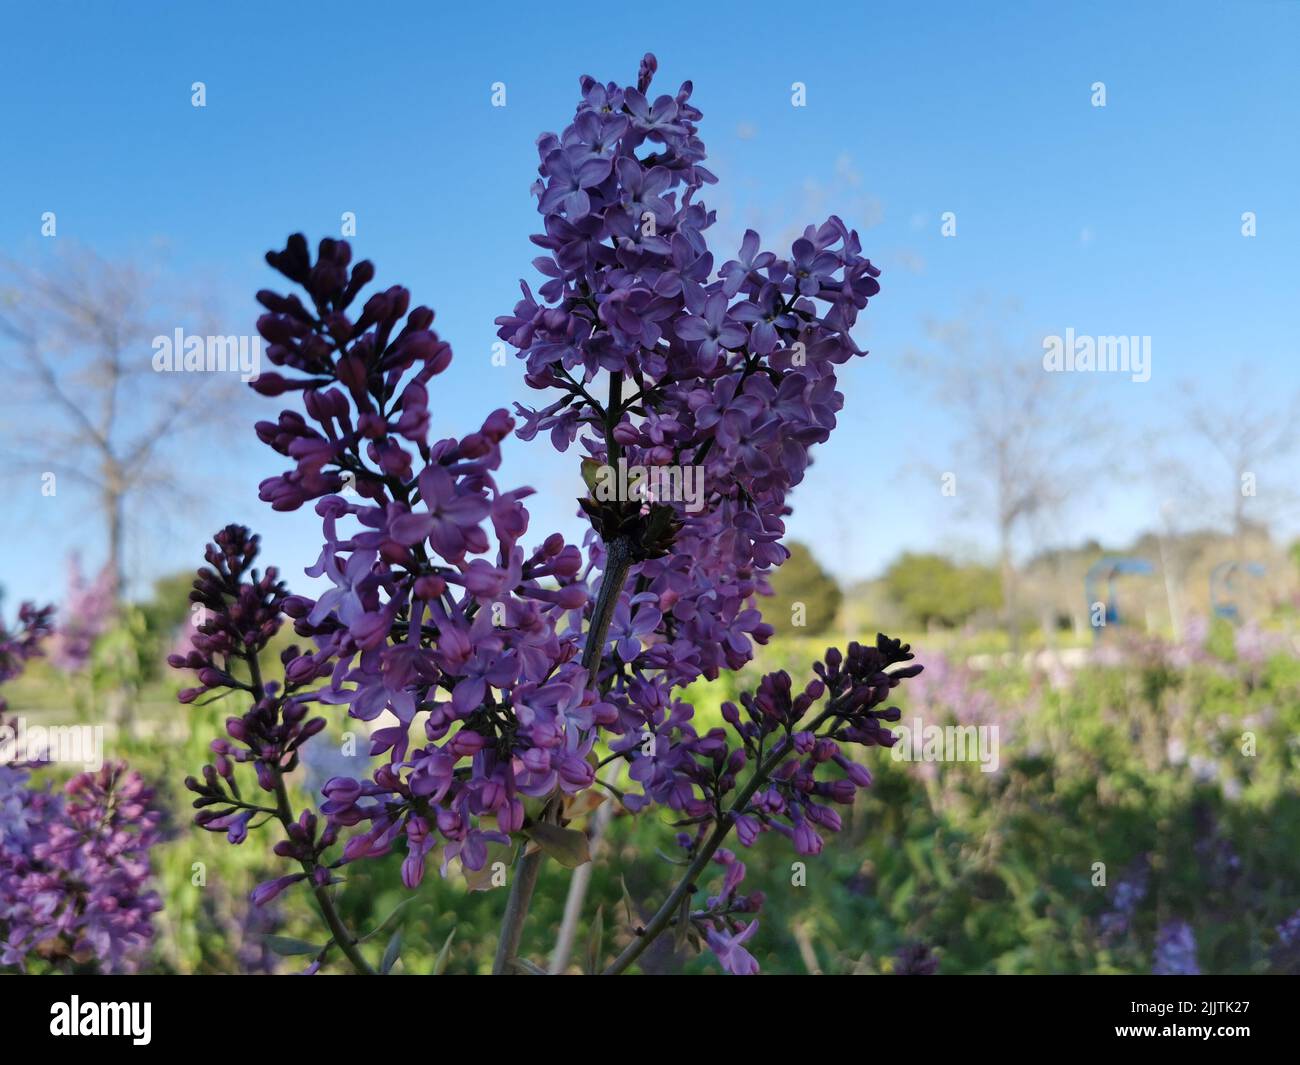 A branch of beautiful Lilac flowers in spring in a blurred background Stock Photo